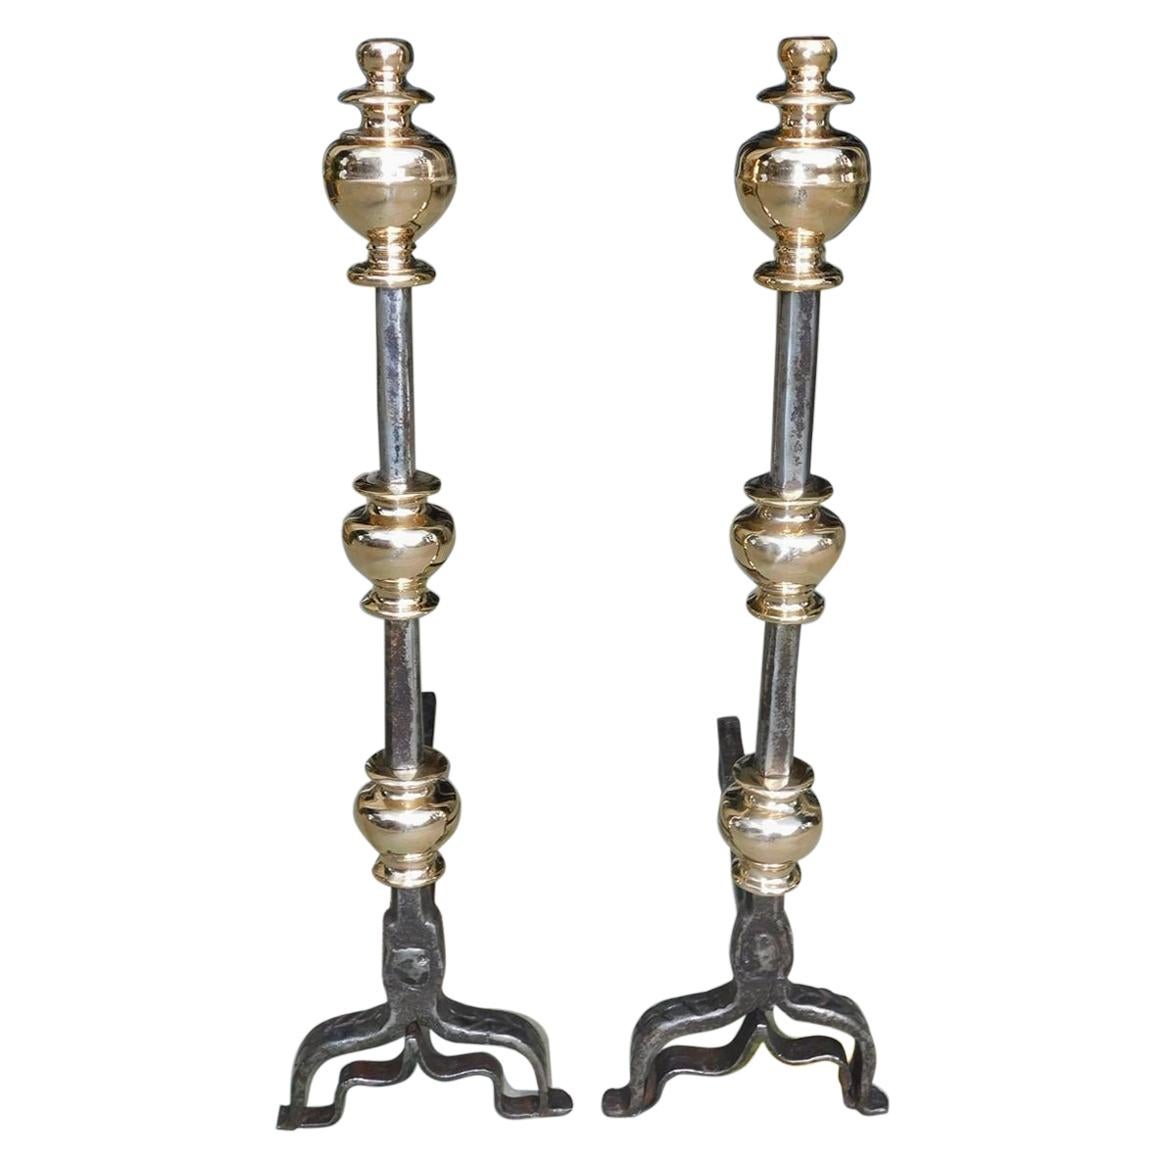 Pair of English Brass and Polished Steel Urn Finial Fire Place Andirons, C. 1780 For Sale